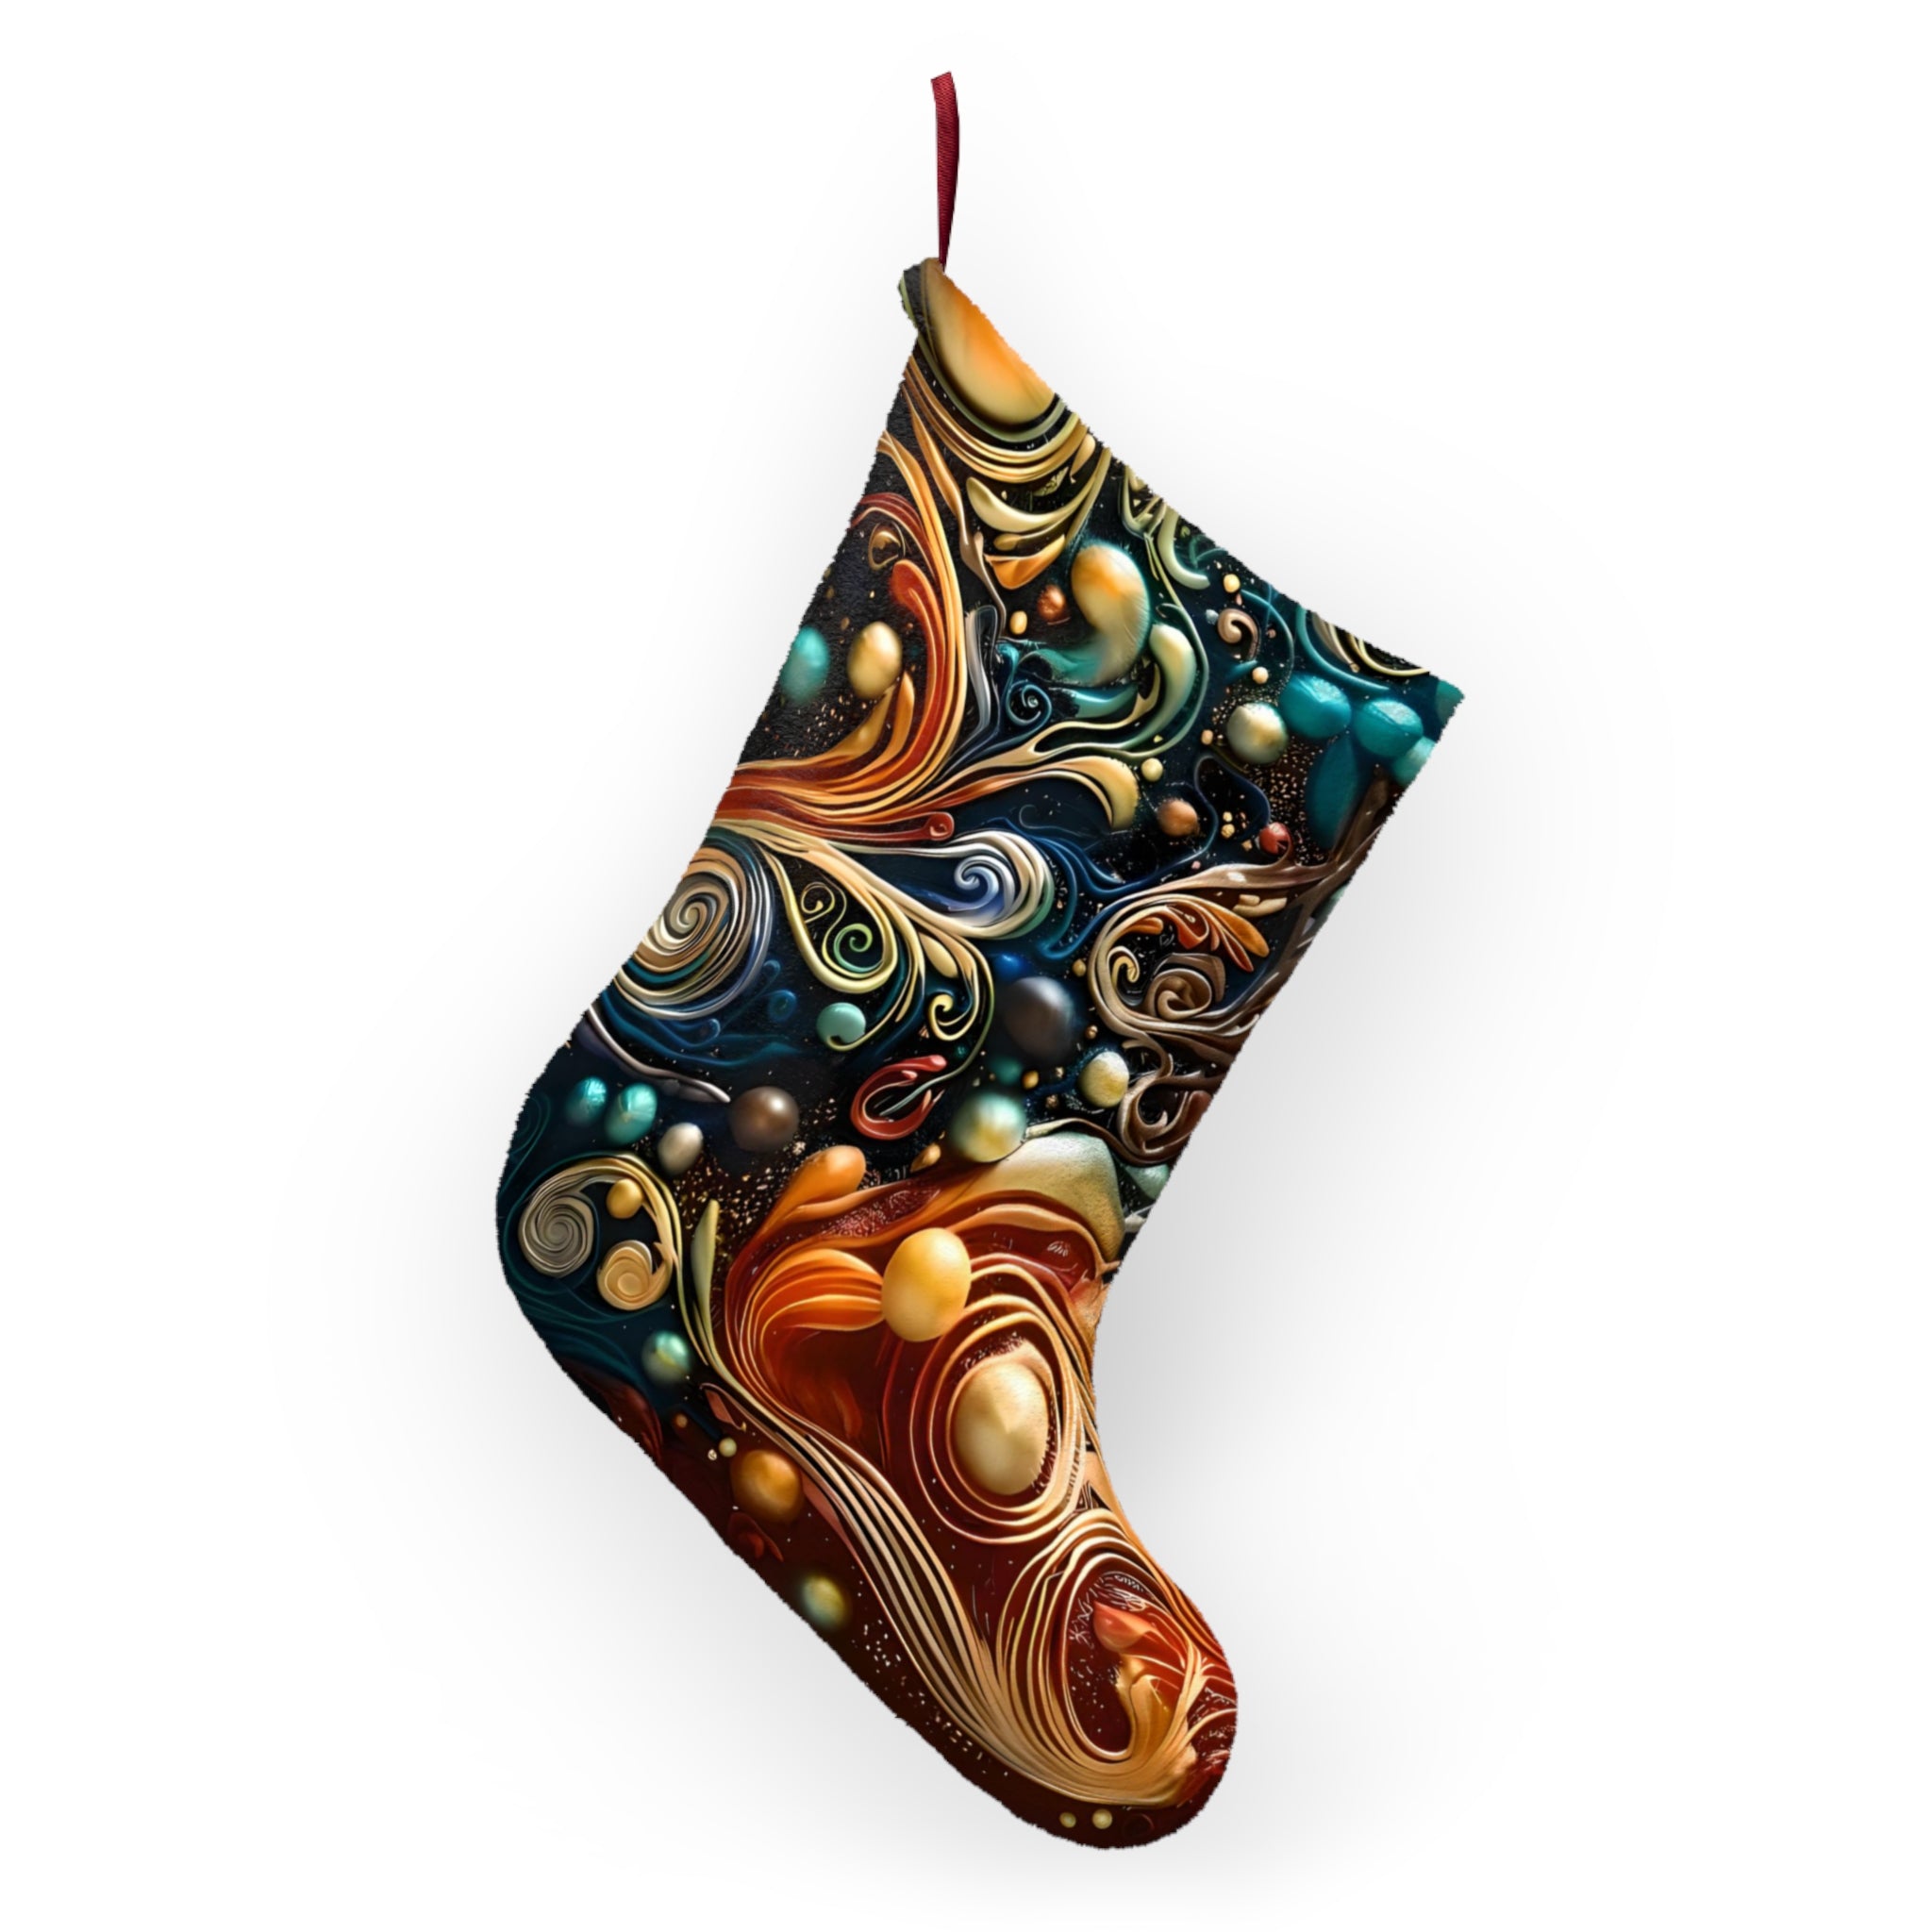 Merry Mantel Mates - Christmas Stockings (double-sided, no cuff)